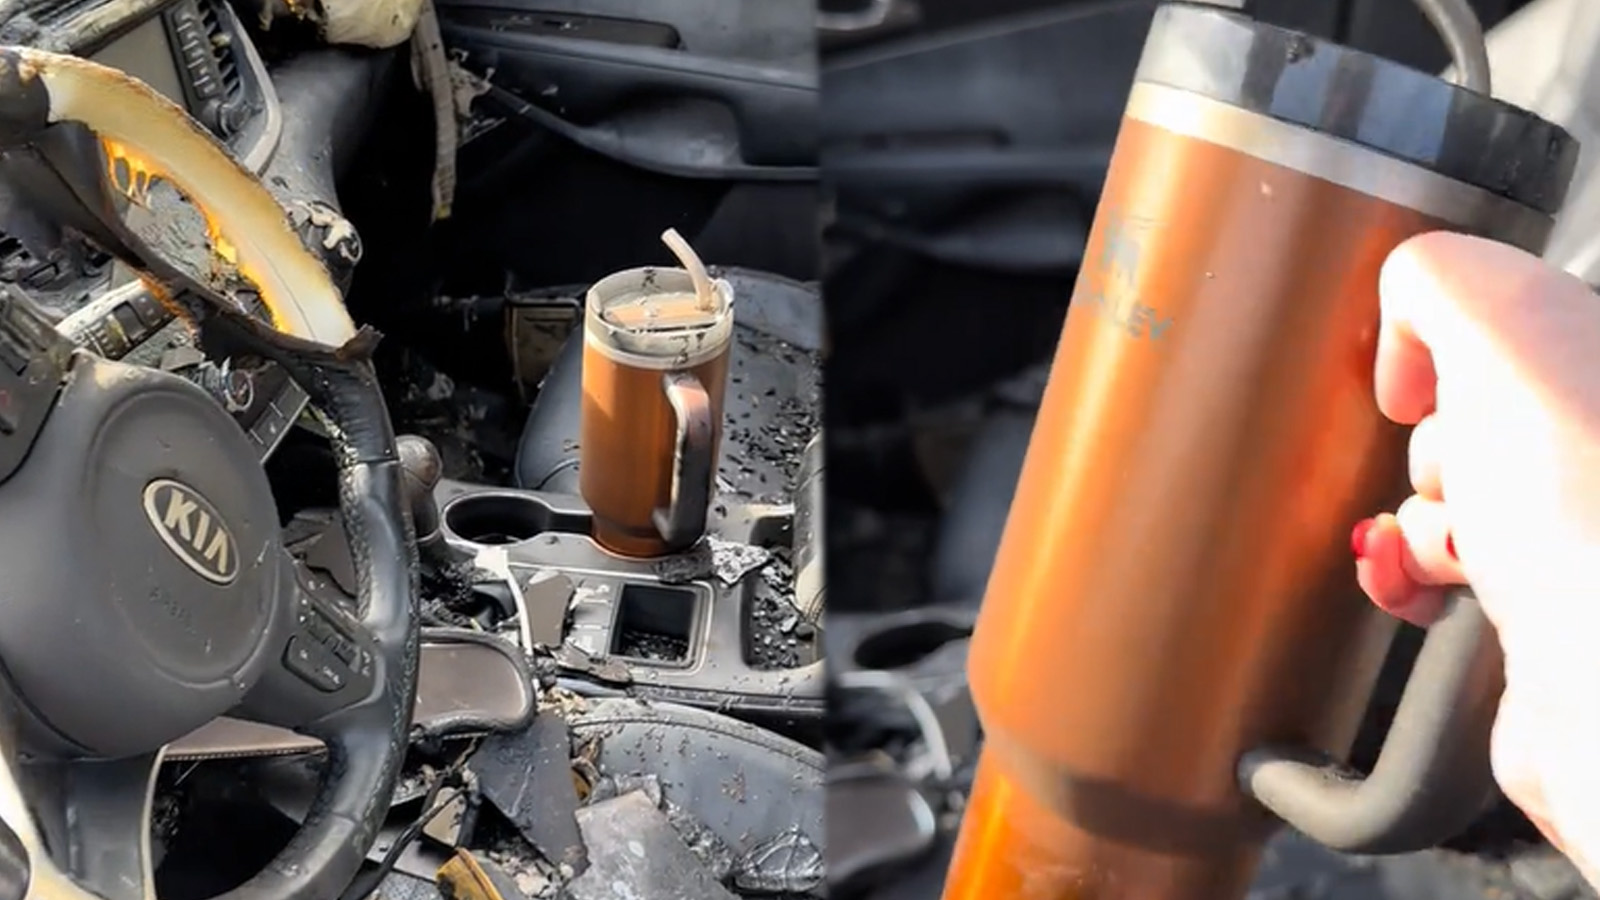 A Stanley tumbler survived a woman's car fire — and the company is